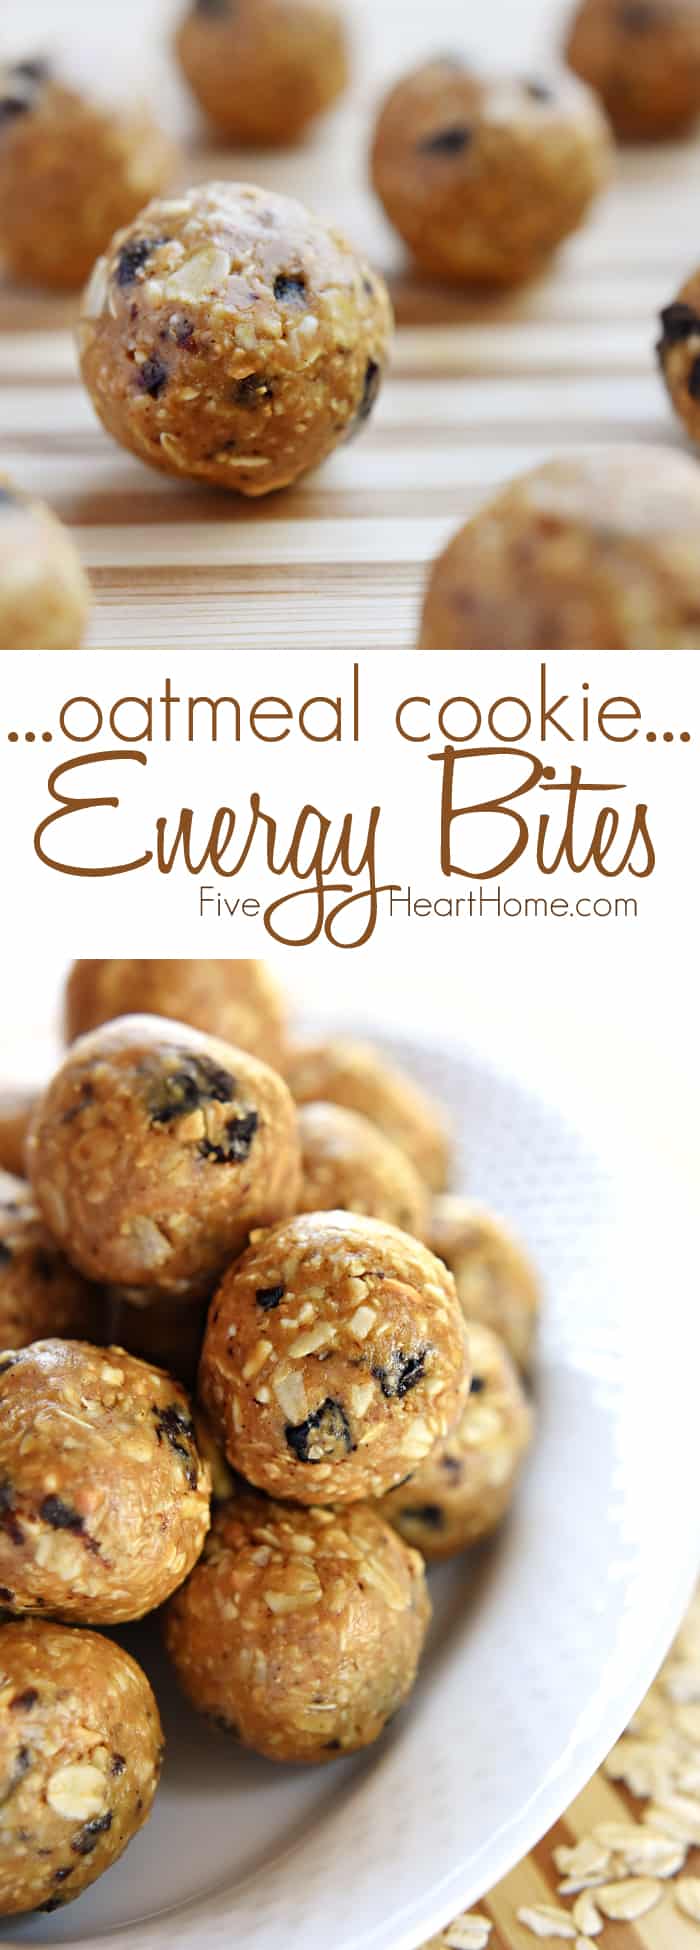 Oatmeal Cookie Energy Bites ~ tasty, no-bake balls combining oats, ground nuts, dried fruit, nut butter, and honey...perfect as a portable breakfast-on-the-go, a protein-packed snack, or a no-guilt-necessary sweet treat! | FiveHeartHome.com via @fivehearthome